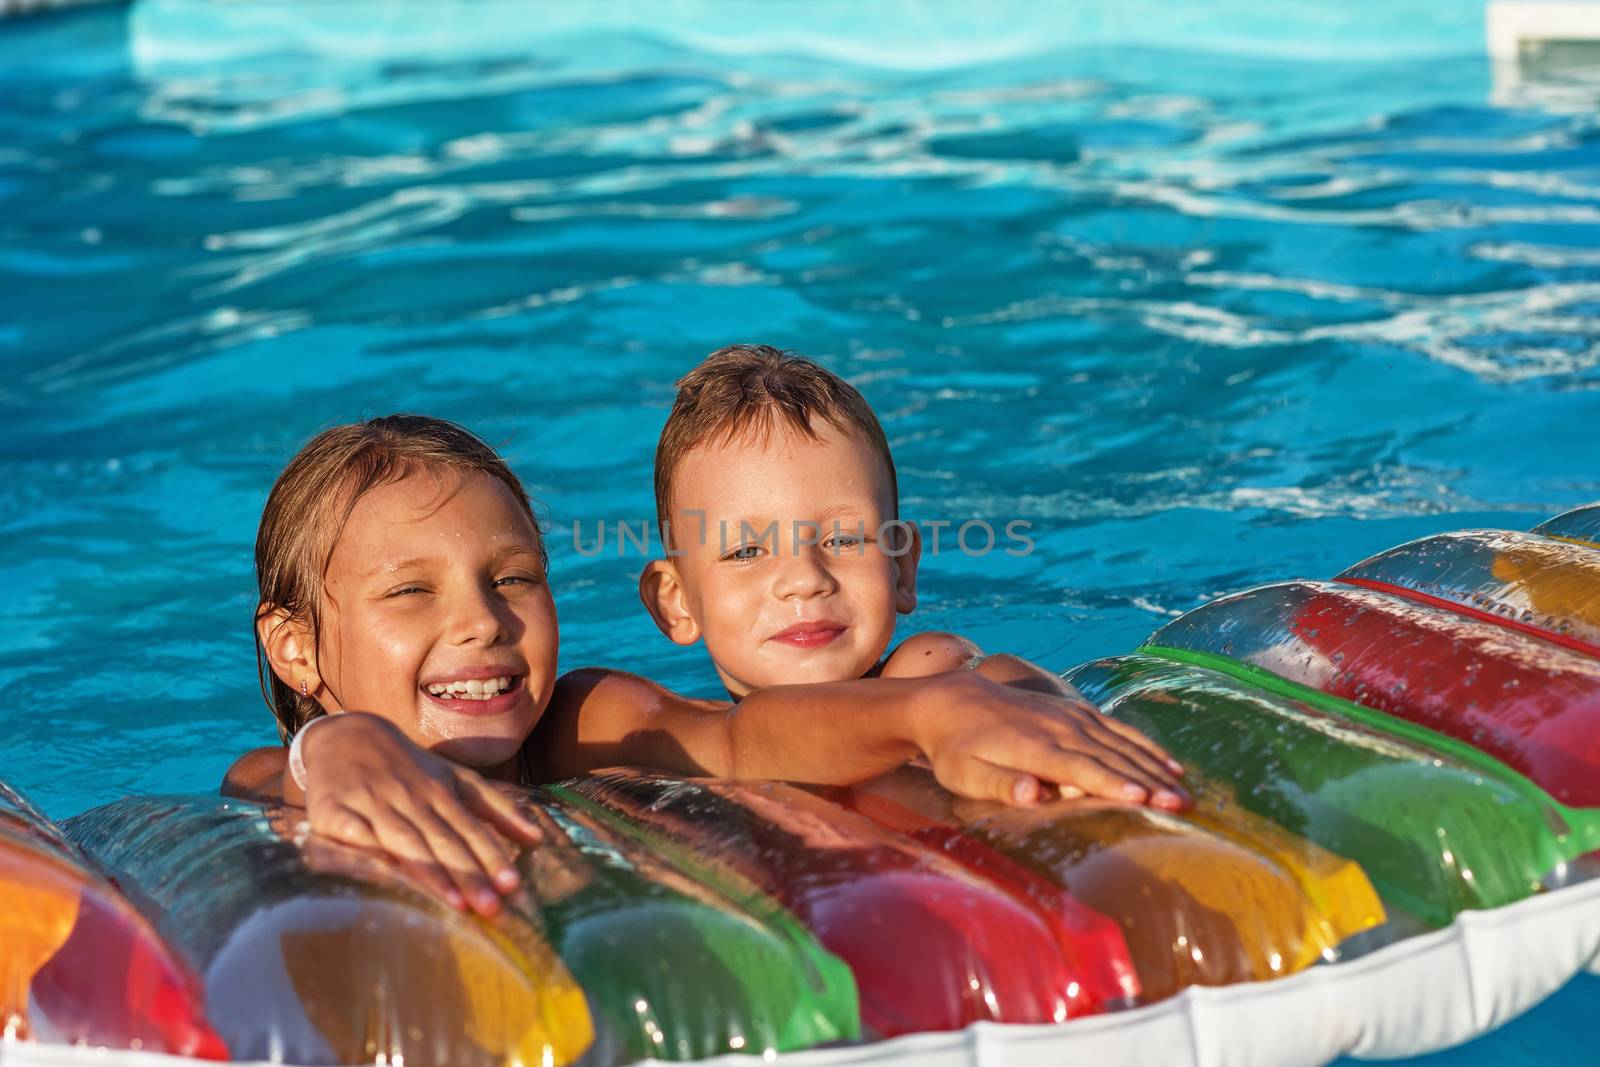 Little children on inflatable mattress in swimming pool. Smiling kids playing and having fun in swimming pool with air mattress. Boy and girl playing in water. Summer vacations concept.